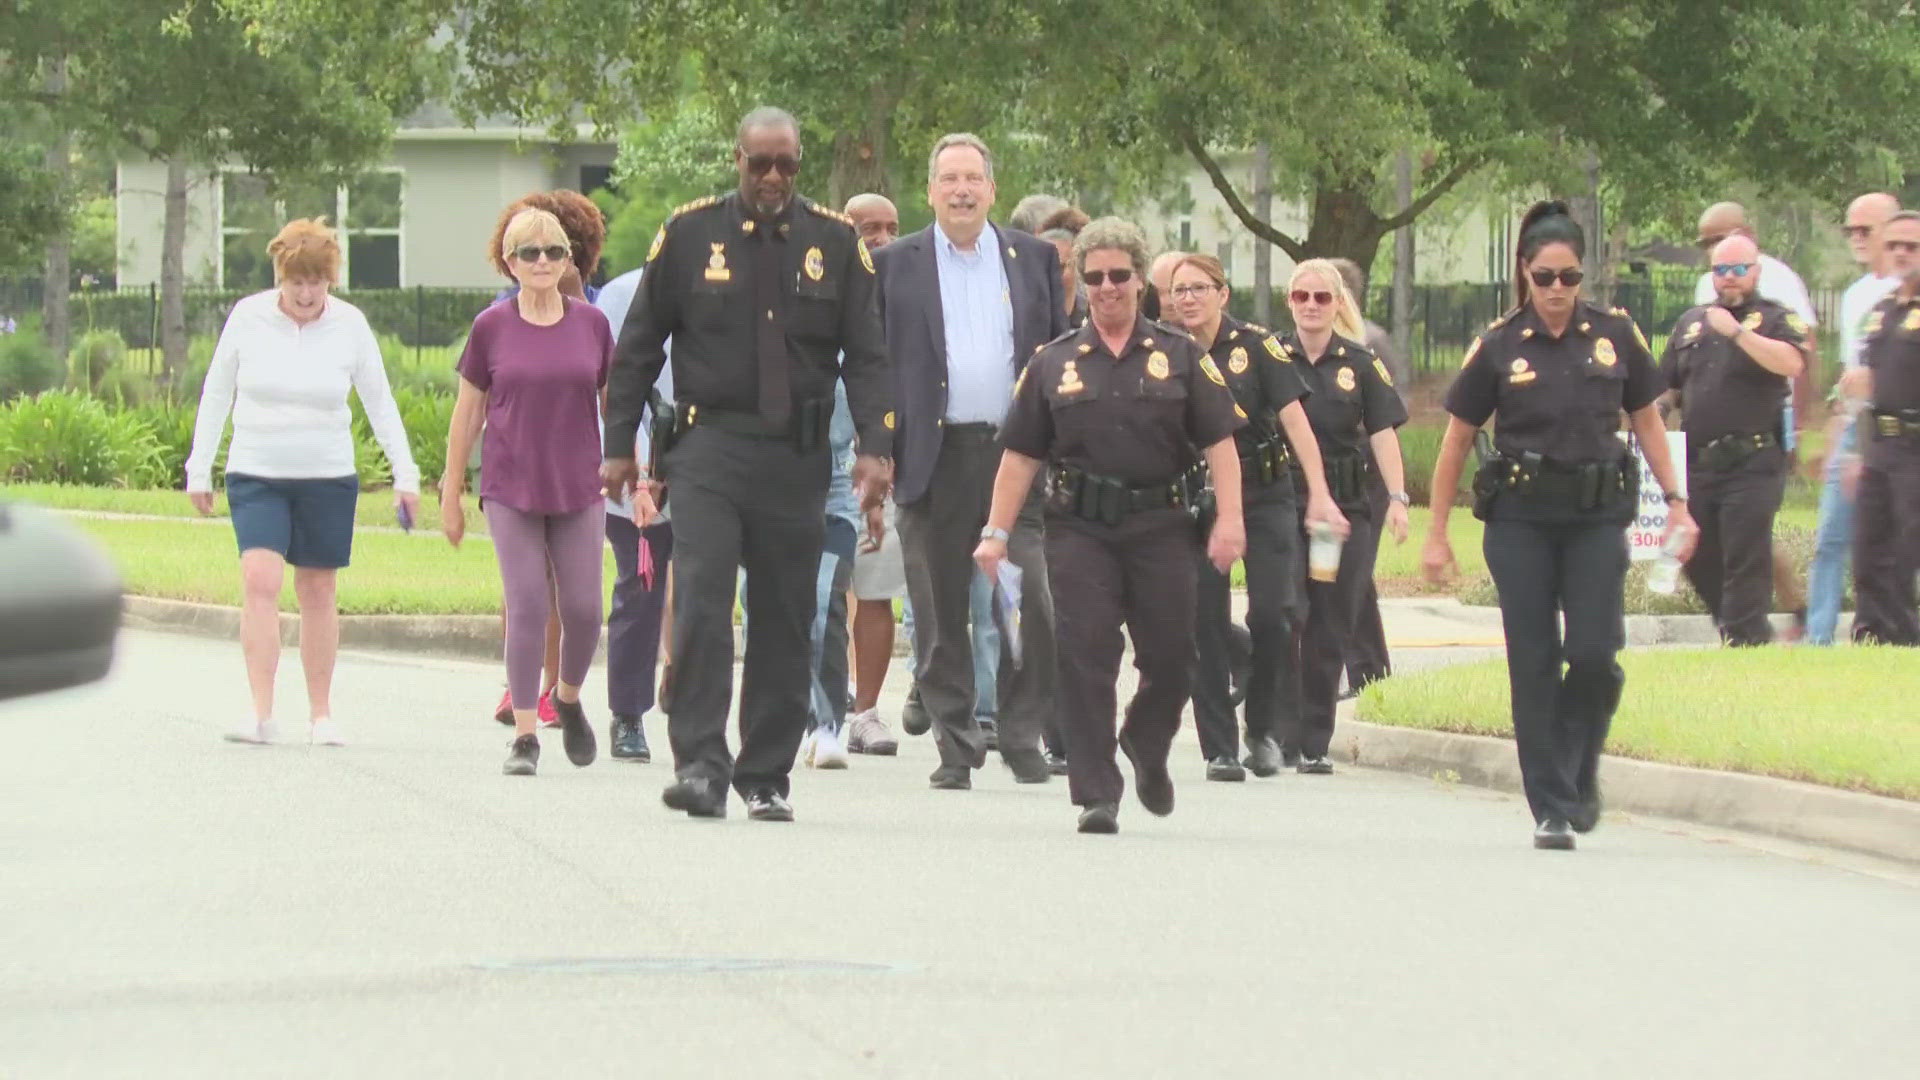 The walk held Saturday morning was meant to provide a space for community members to talk with the sheriff and other officers about crime in the area.